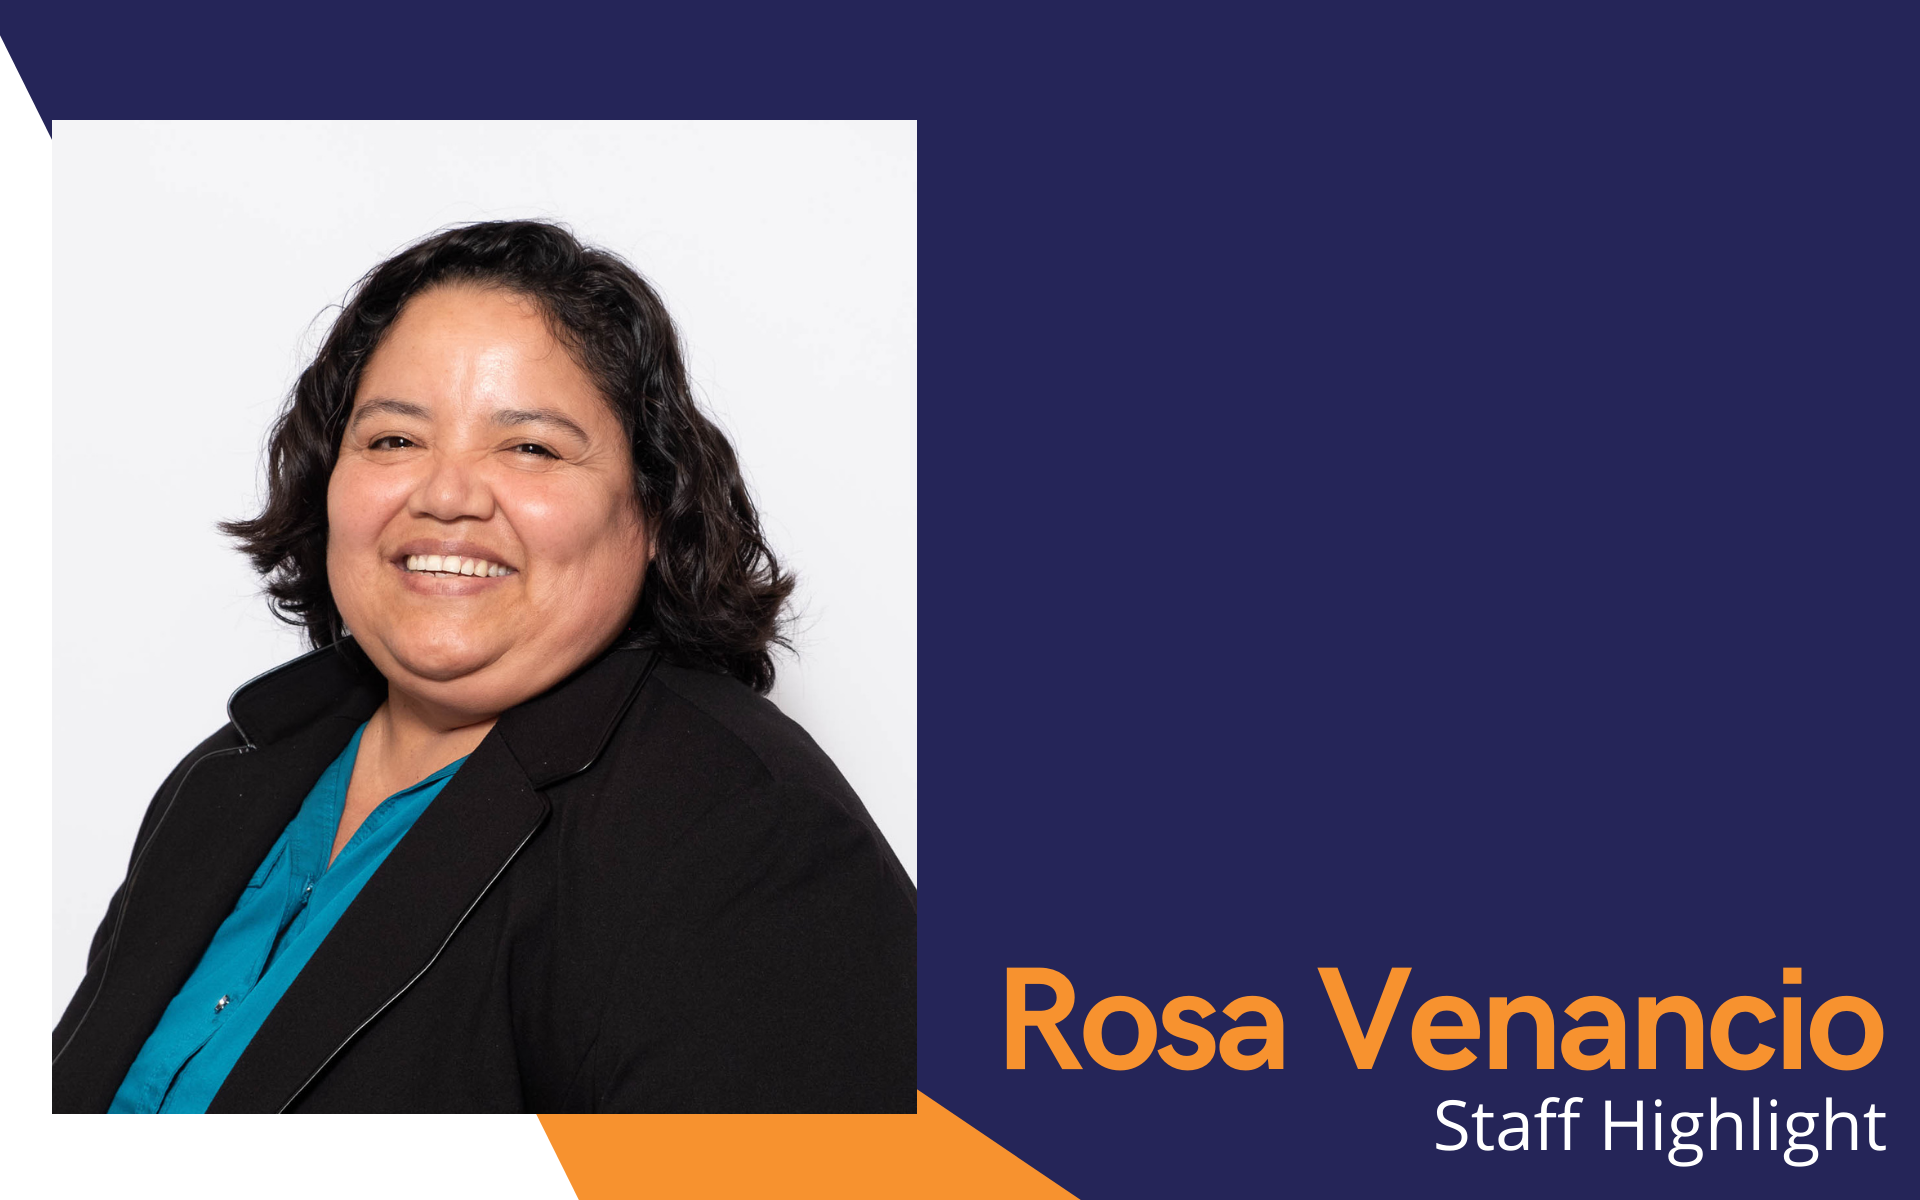 Staff Highlight: Rosa Venancio – Family Education & Support Services